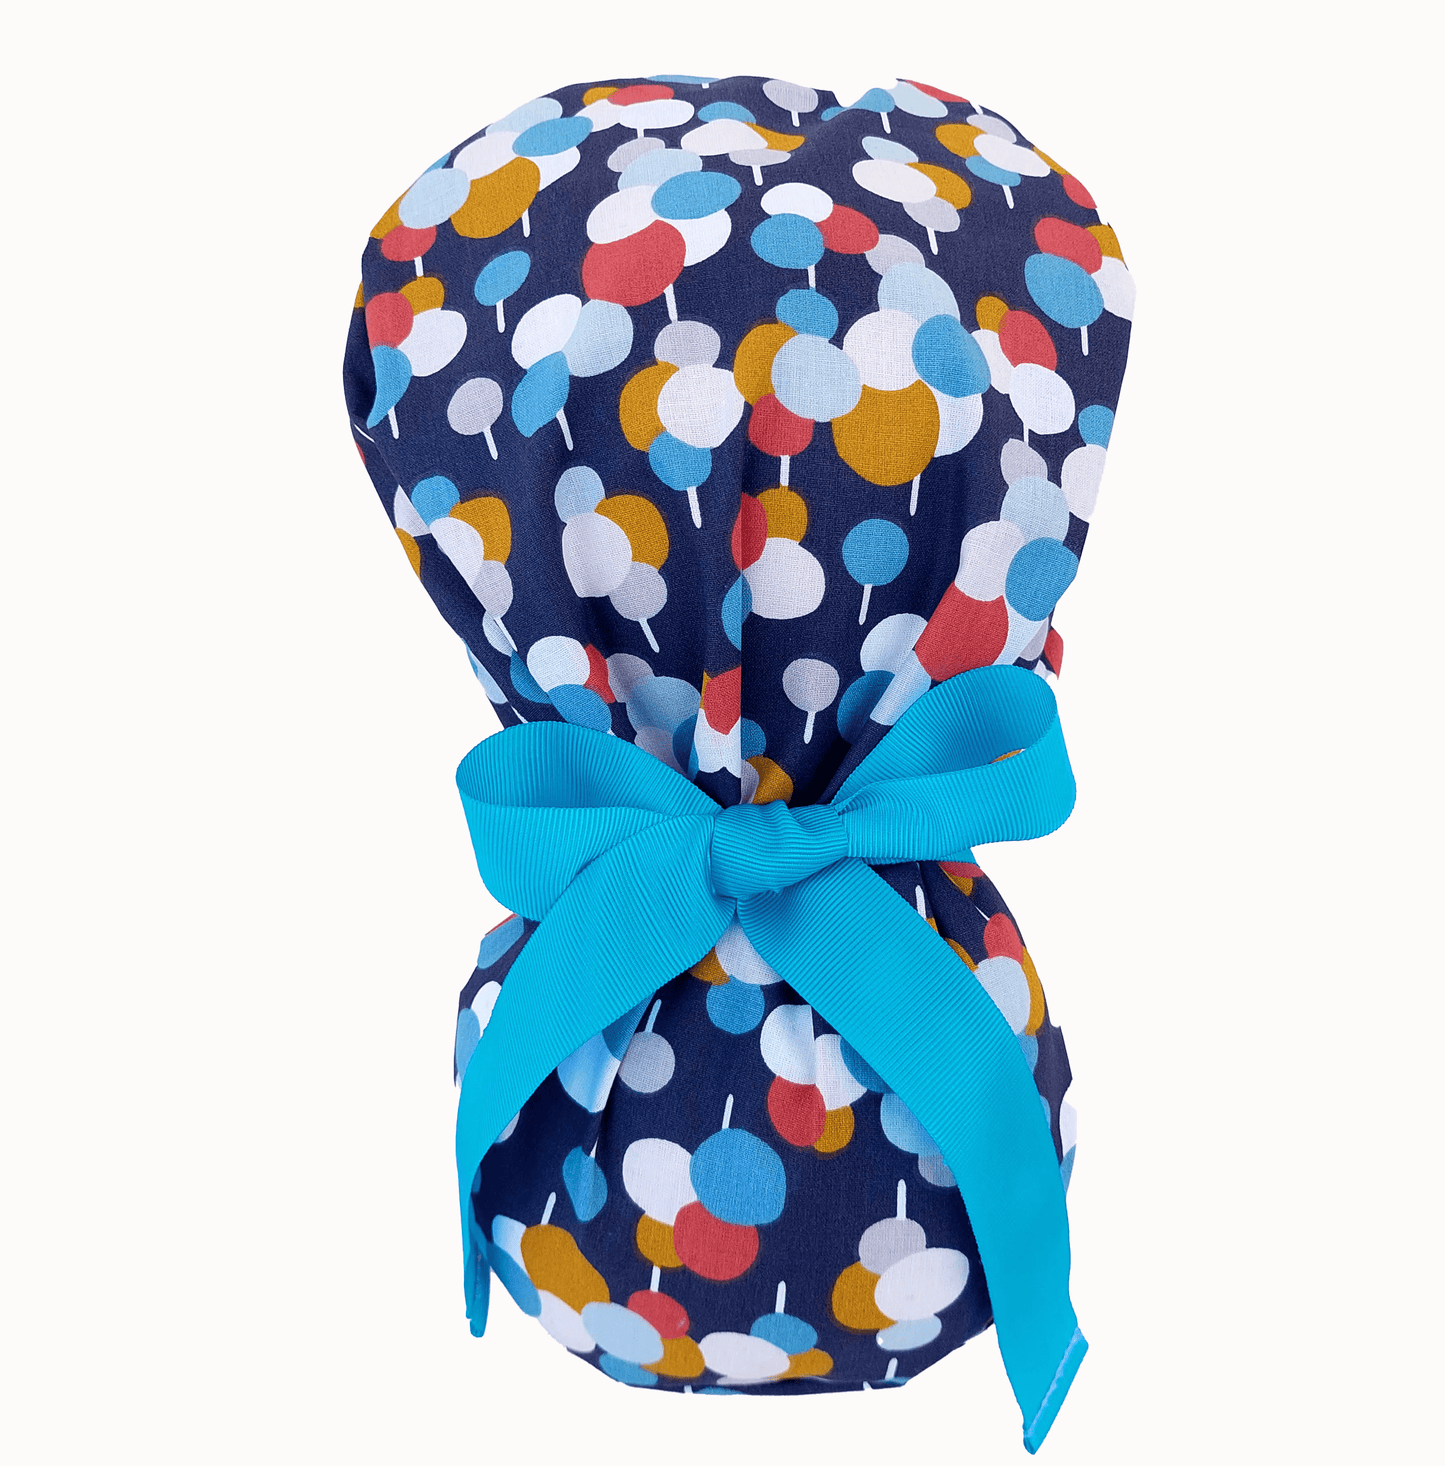 Ponytail Surgical Scrub Cap - Bright and Colorful Bubble Design